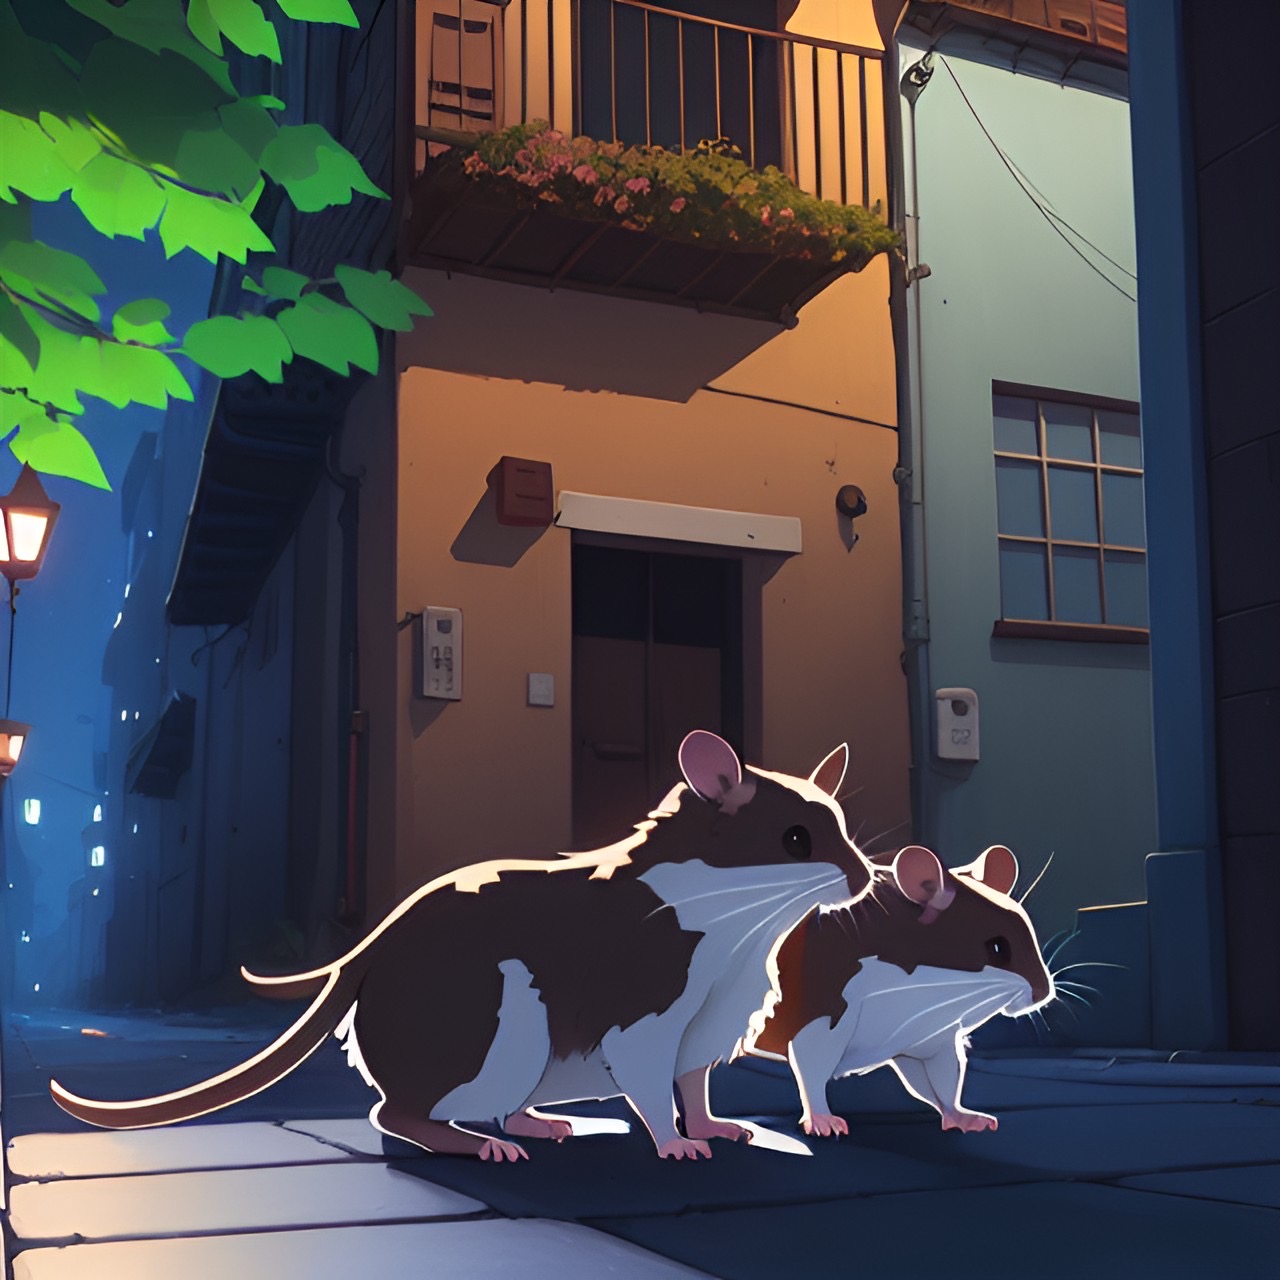 A pair of rats on the street at night